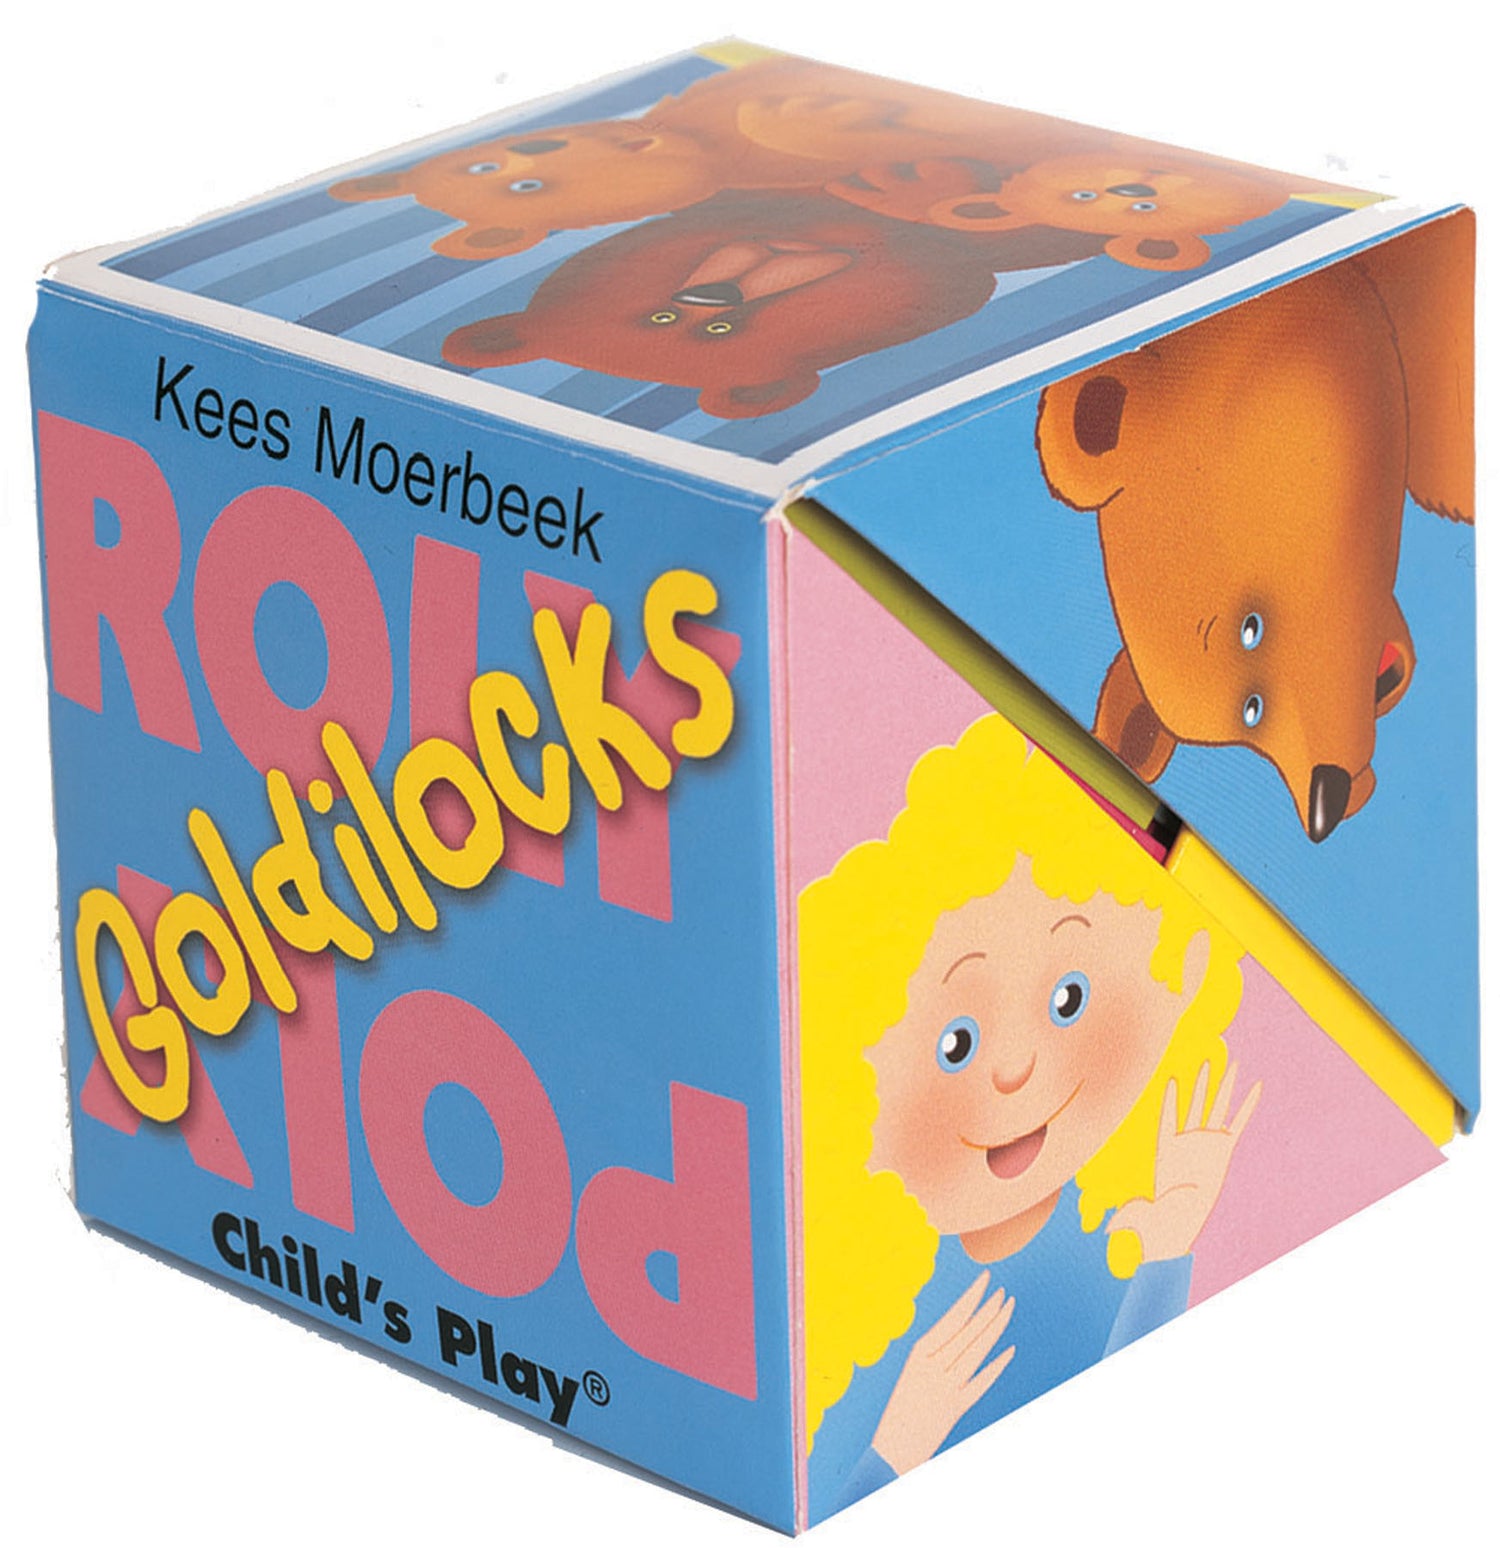 Roly Poly Box Books